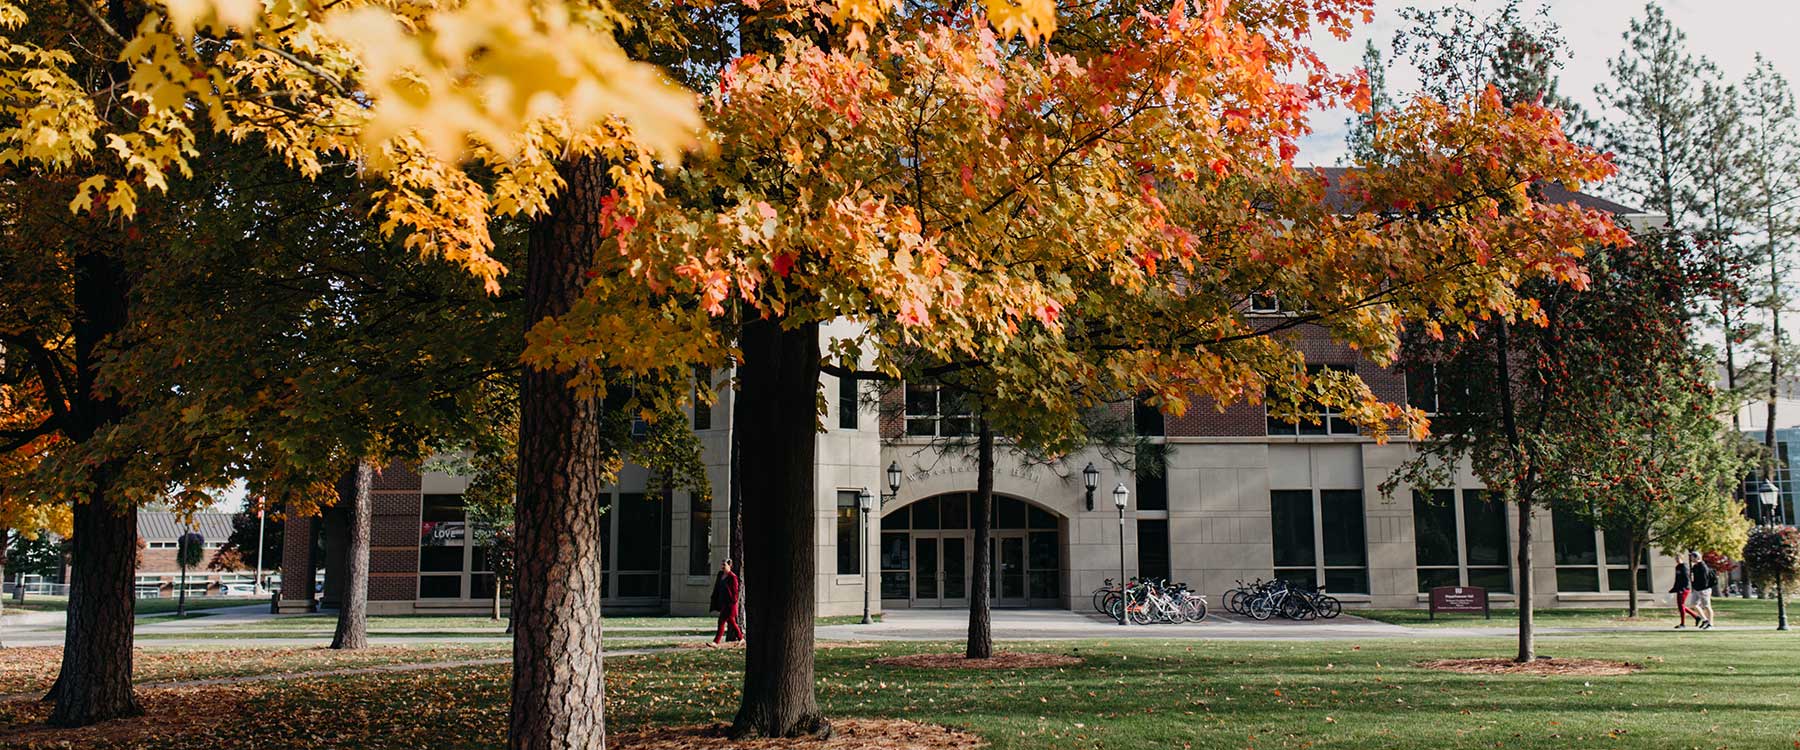 A row of trees turning yellow in front of an academic building in autumn on Whitworths campus.